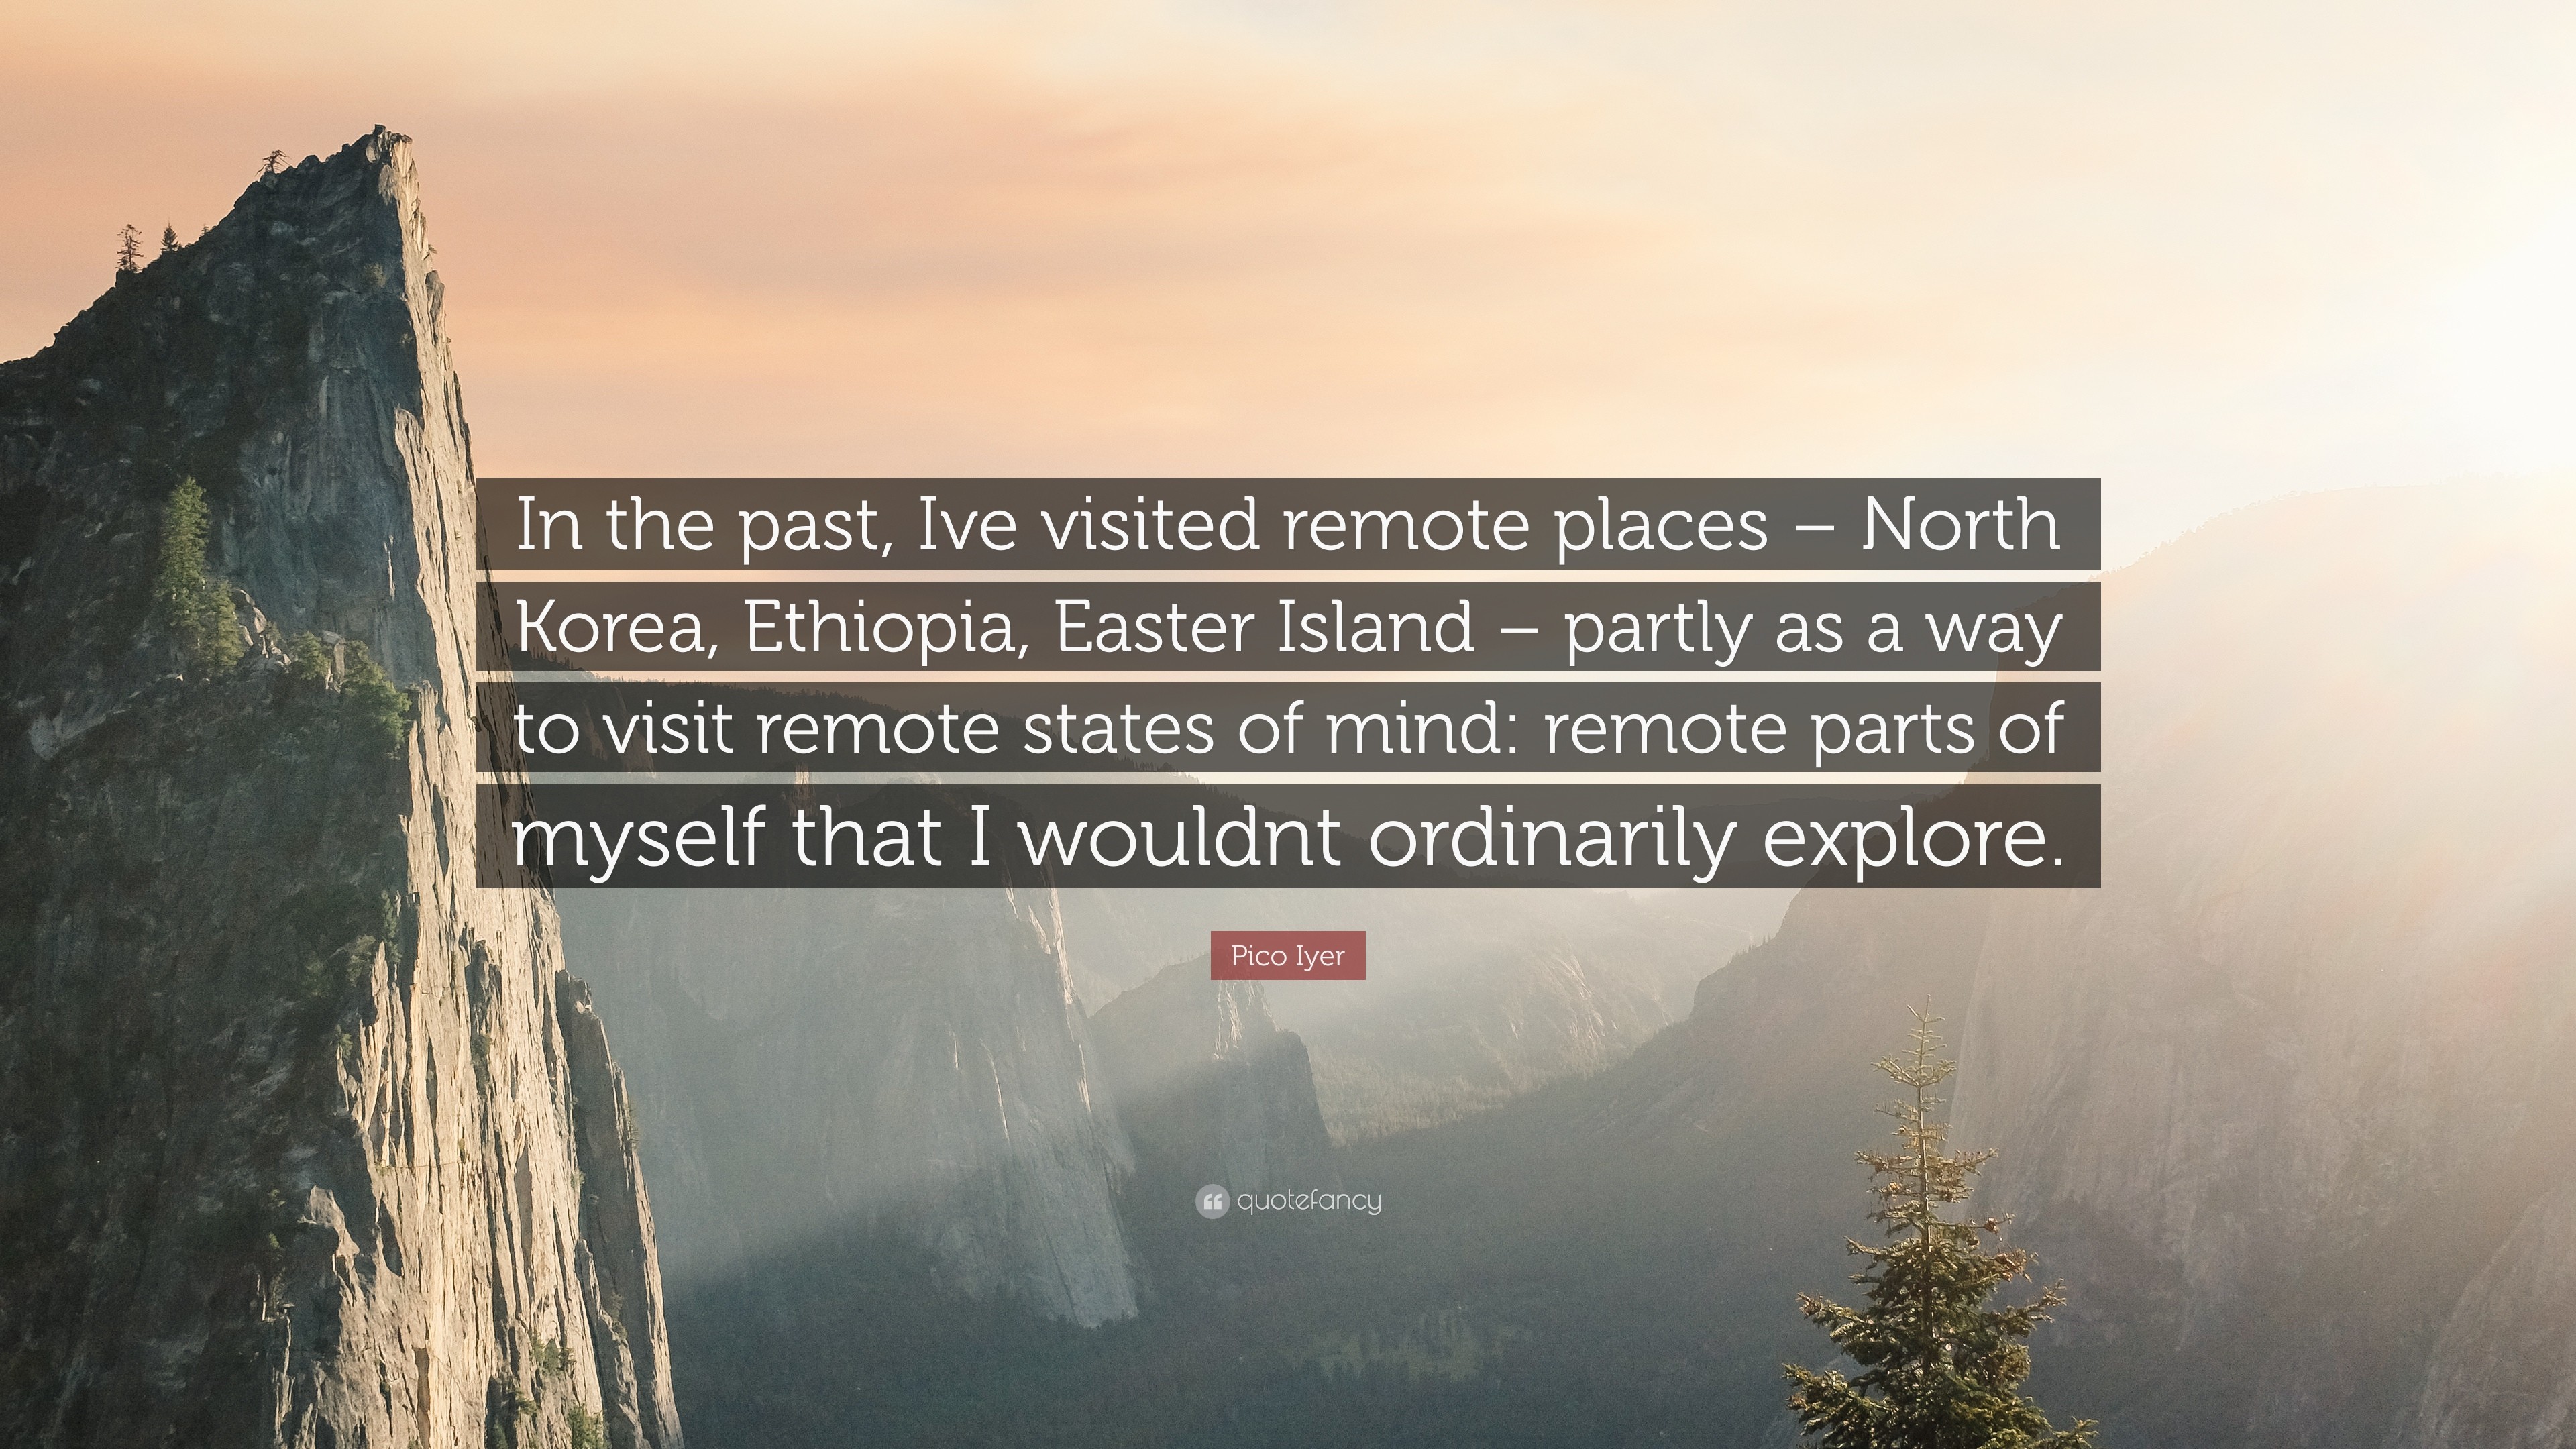 3840x2160 Pico Iyer Quote: “In the past, Ive visited remote places – North Korea